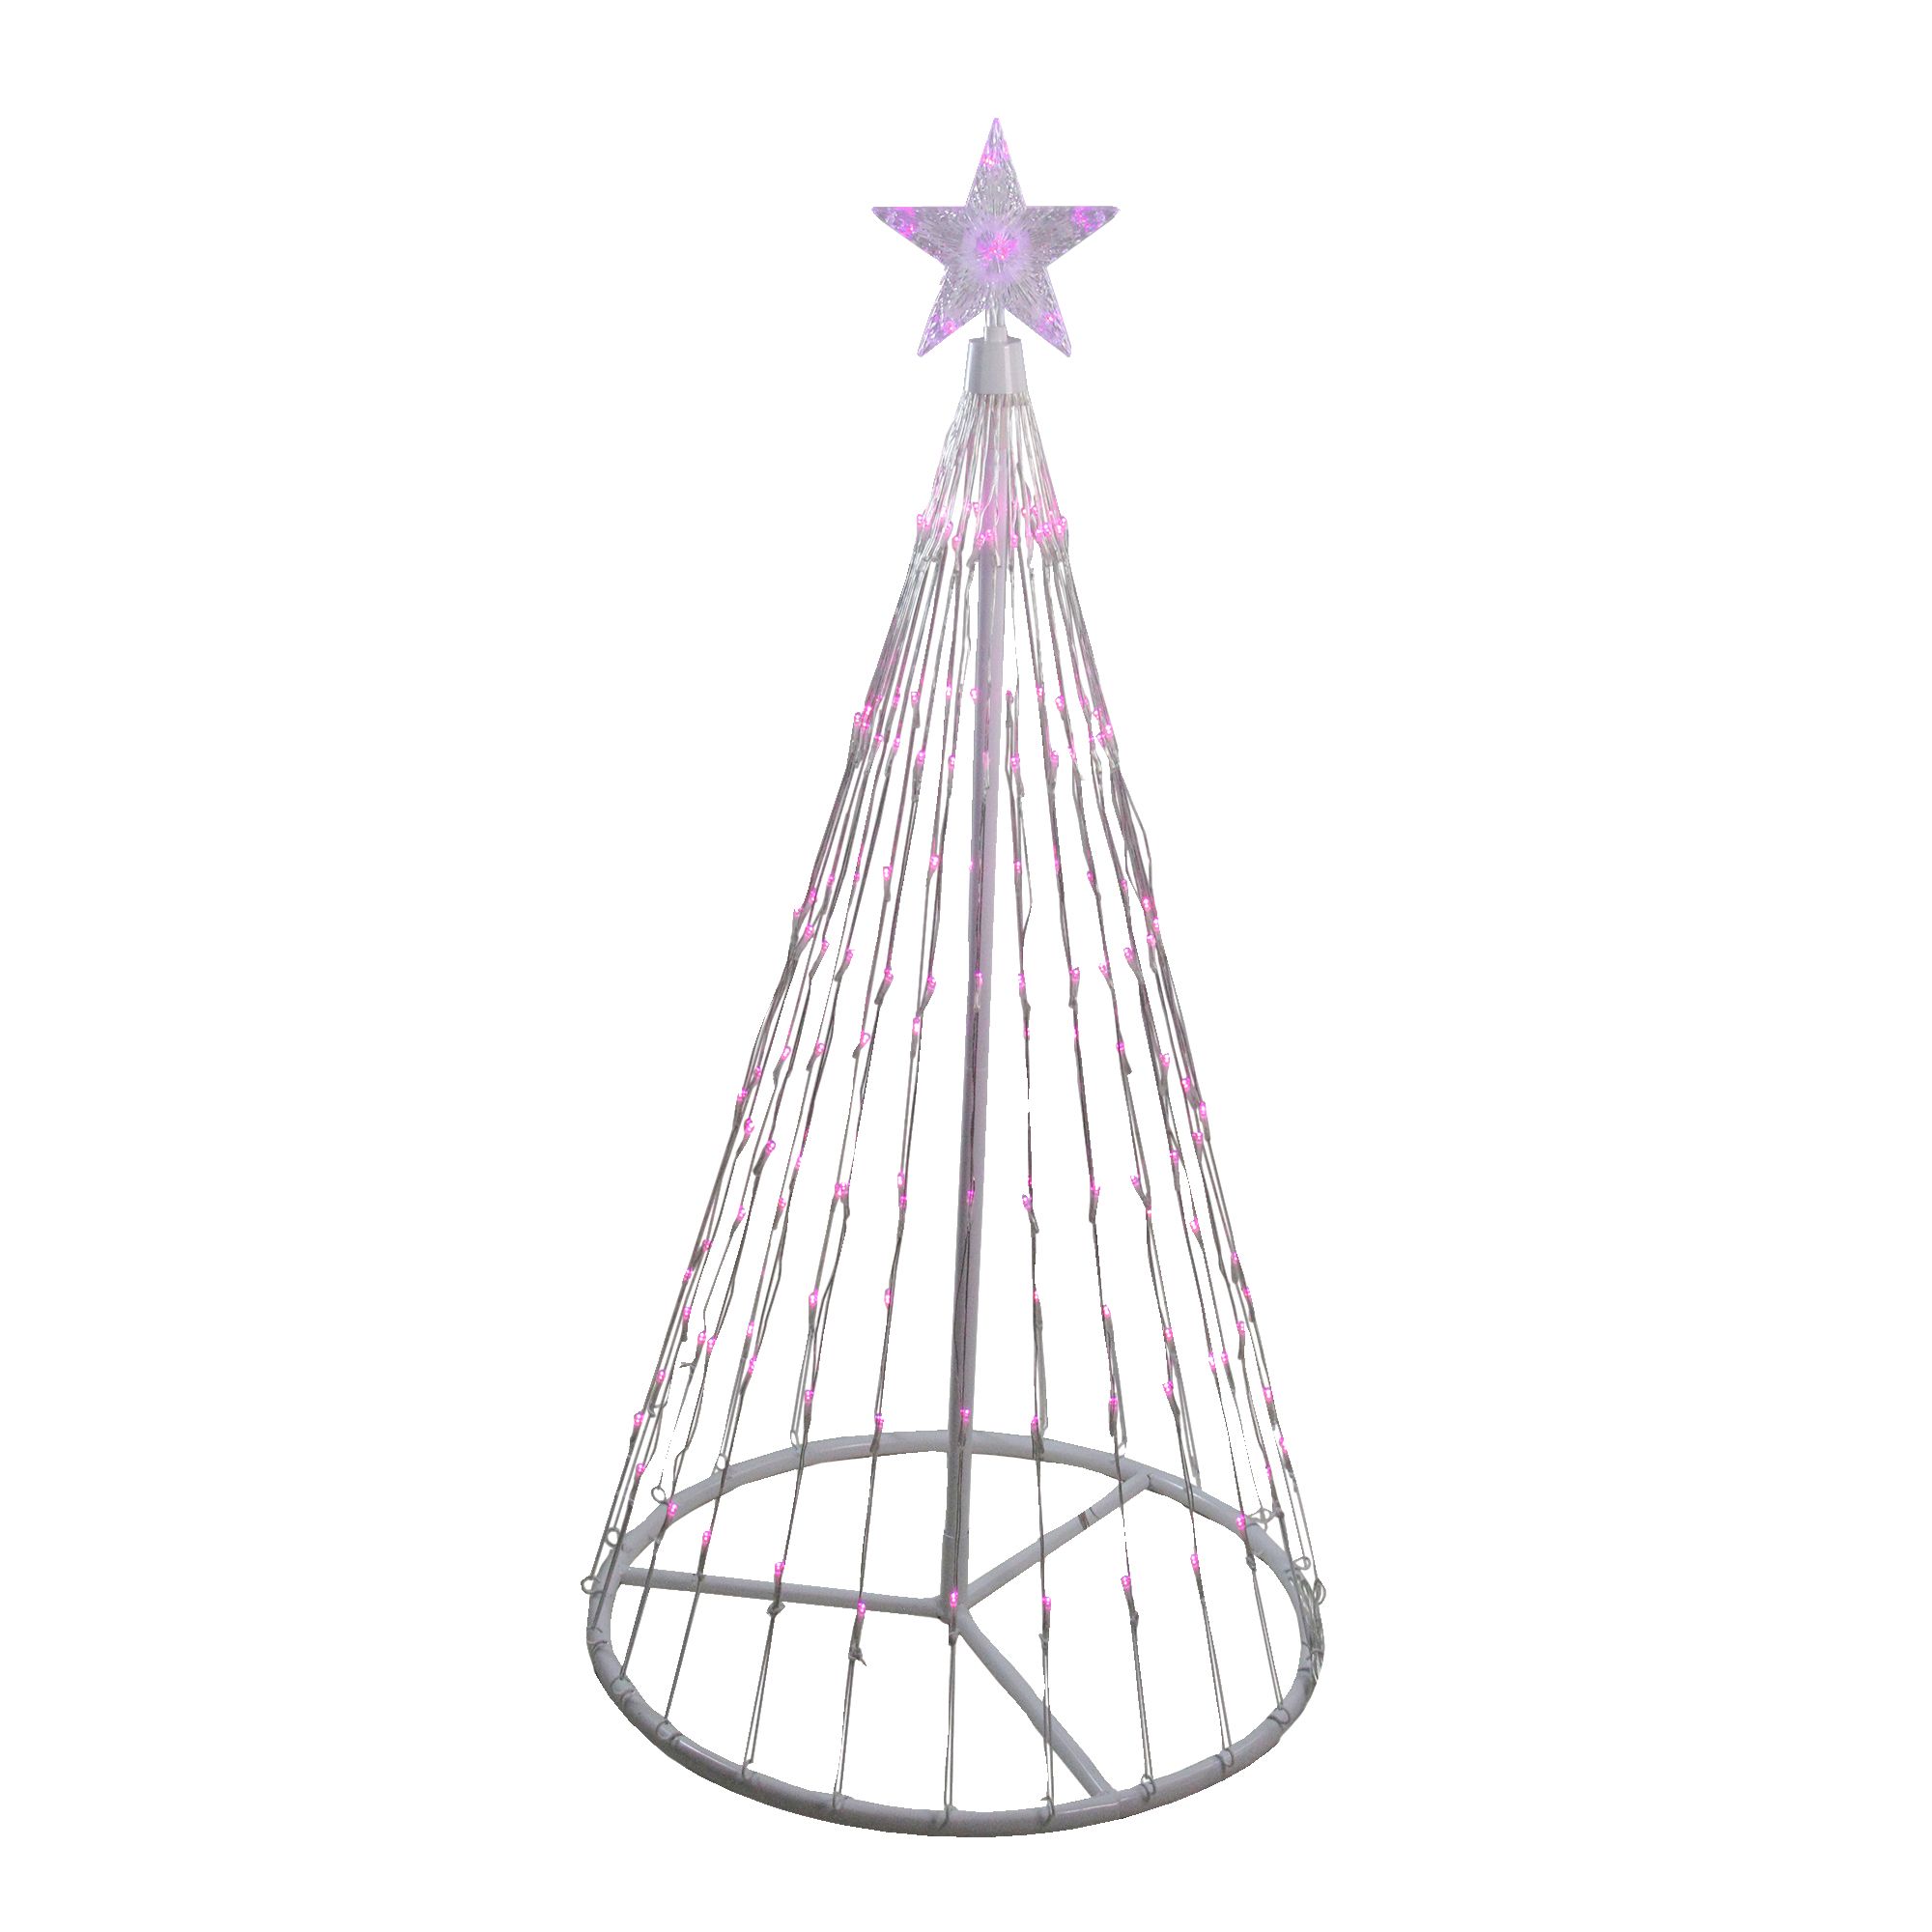 Northlight 4' LED Lighted Show Cone Christmas Tree Outdoor Decoration - Pink